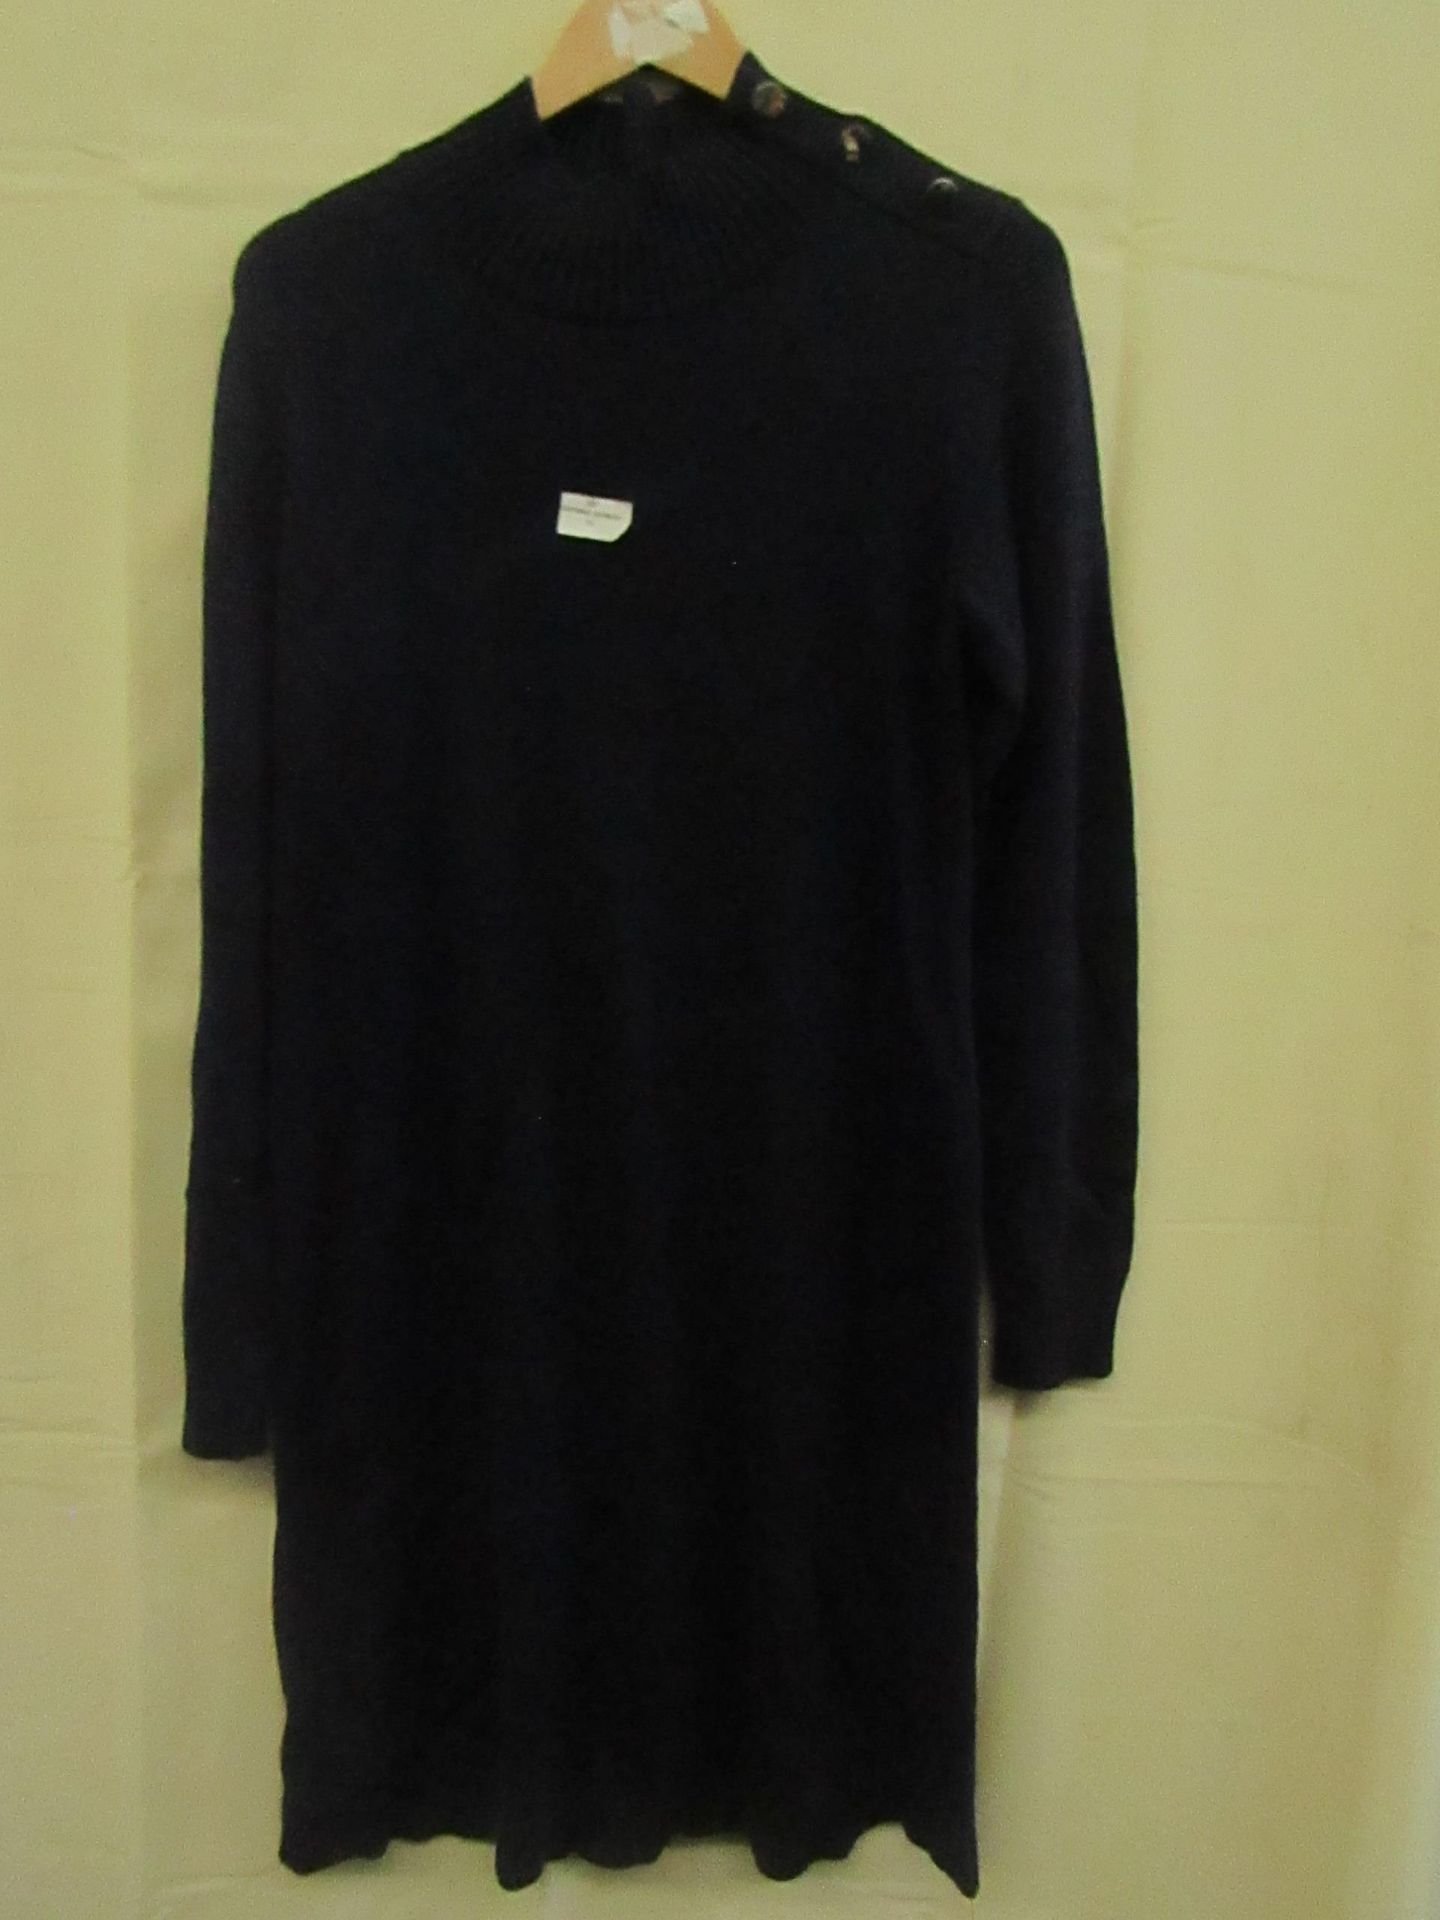 Unbranded - Navy Knitted Dress - Size Unknown - No Packaging.